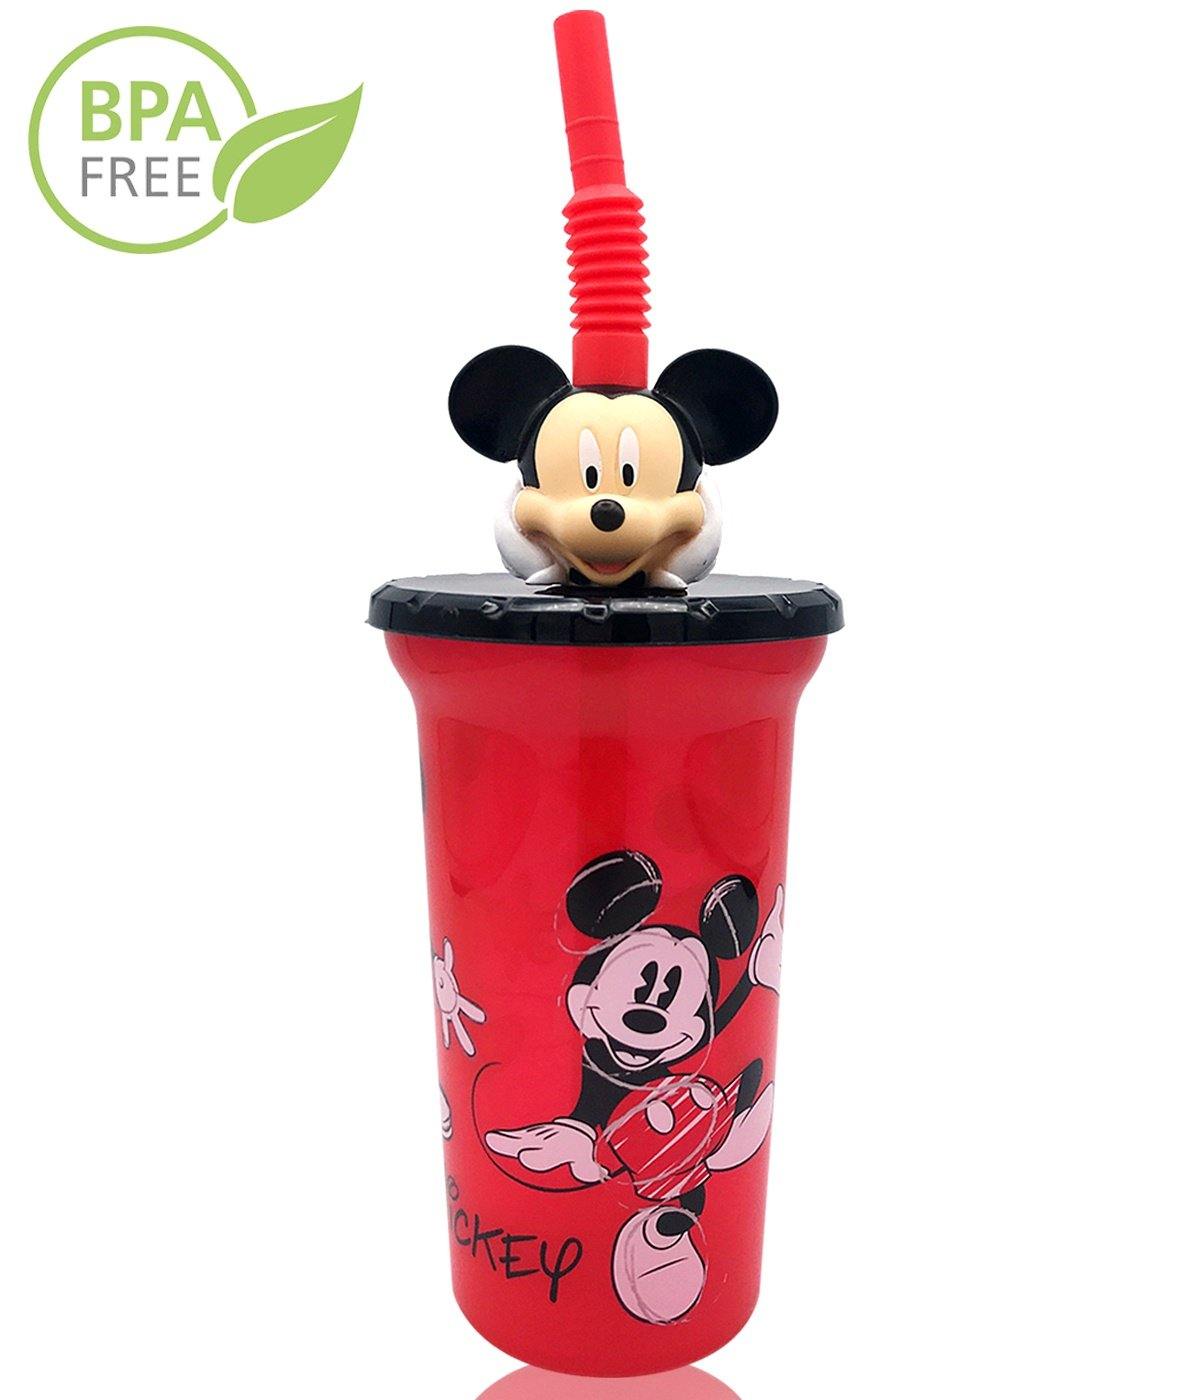 Disney Mickey Mouse 15oz Buddy Sips Cup